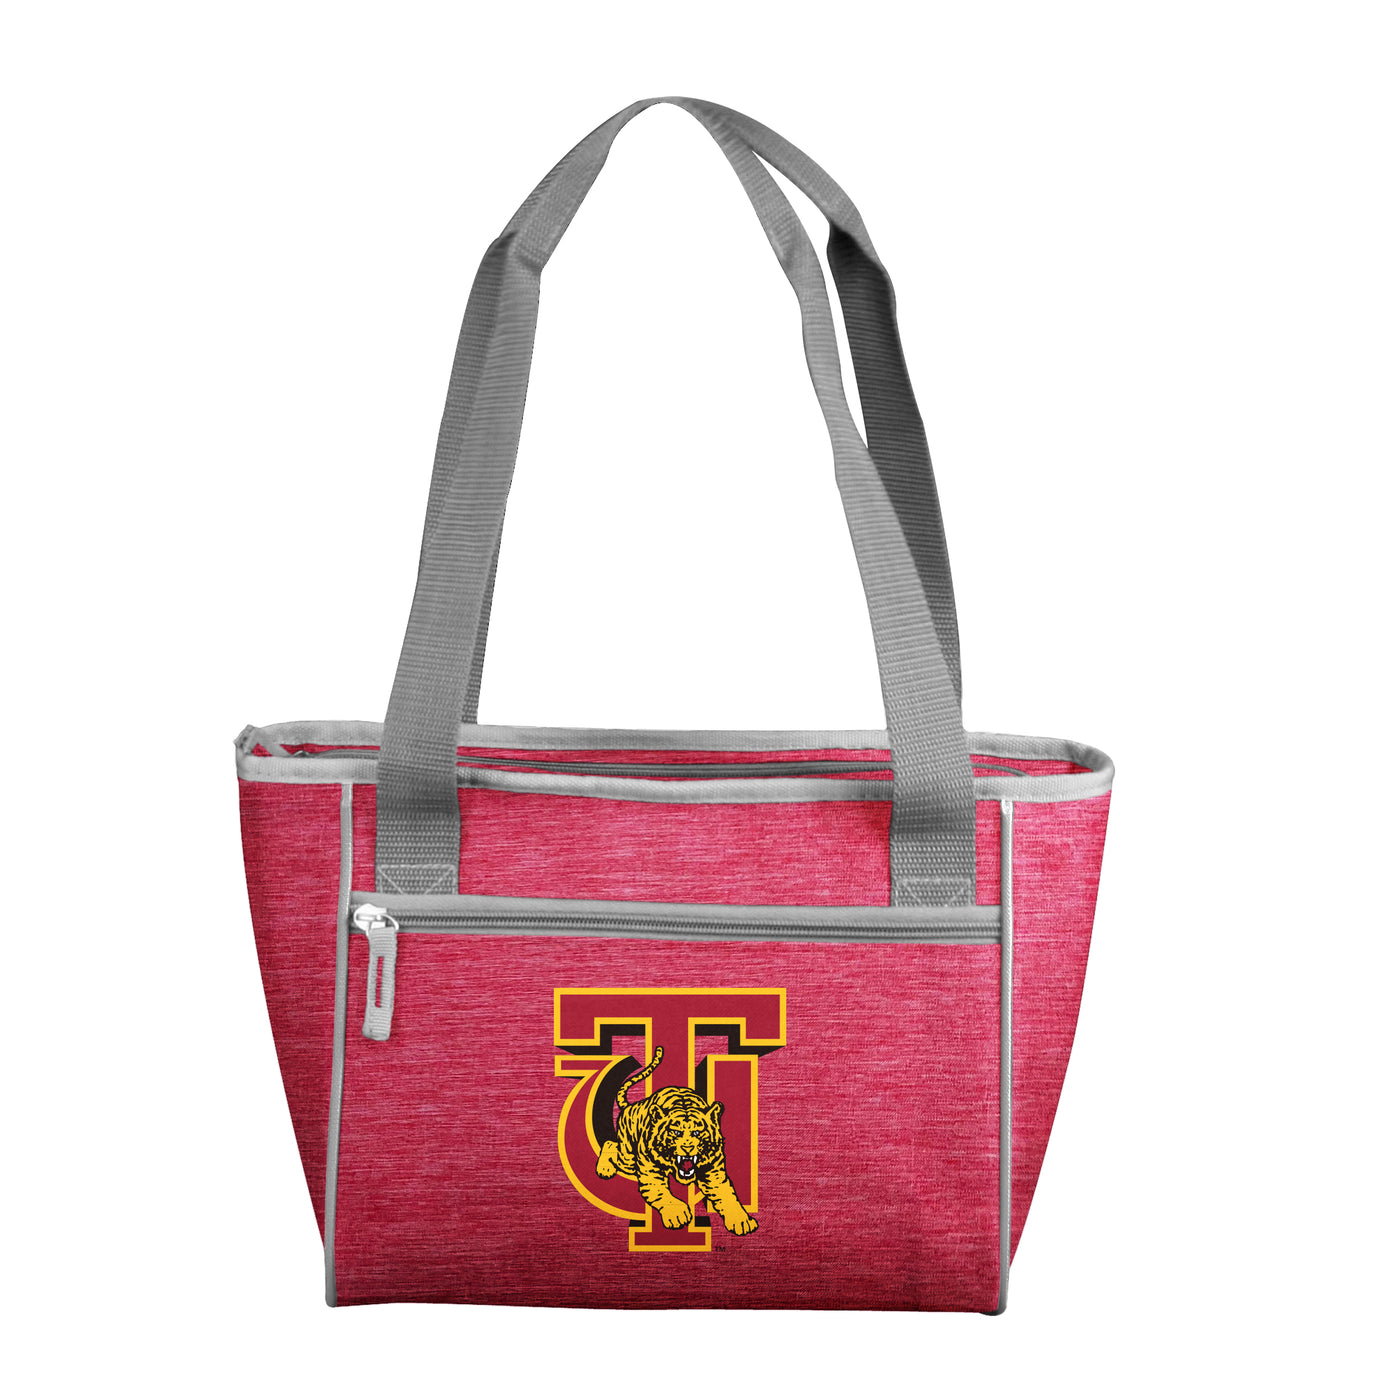 Tuskegee 16 Can Cooler Tote